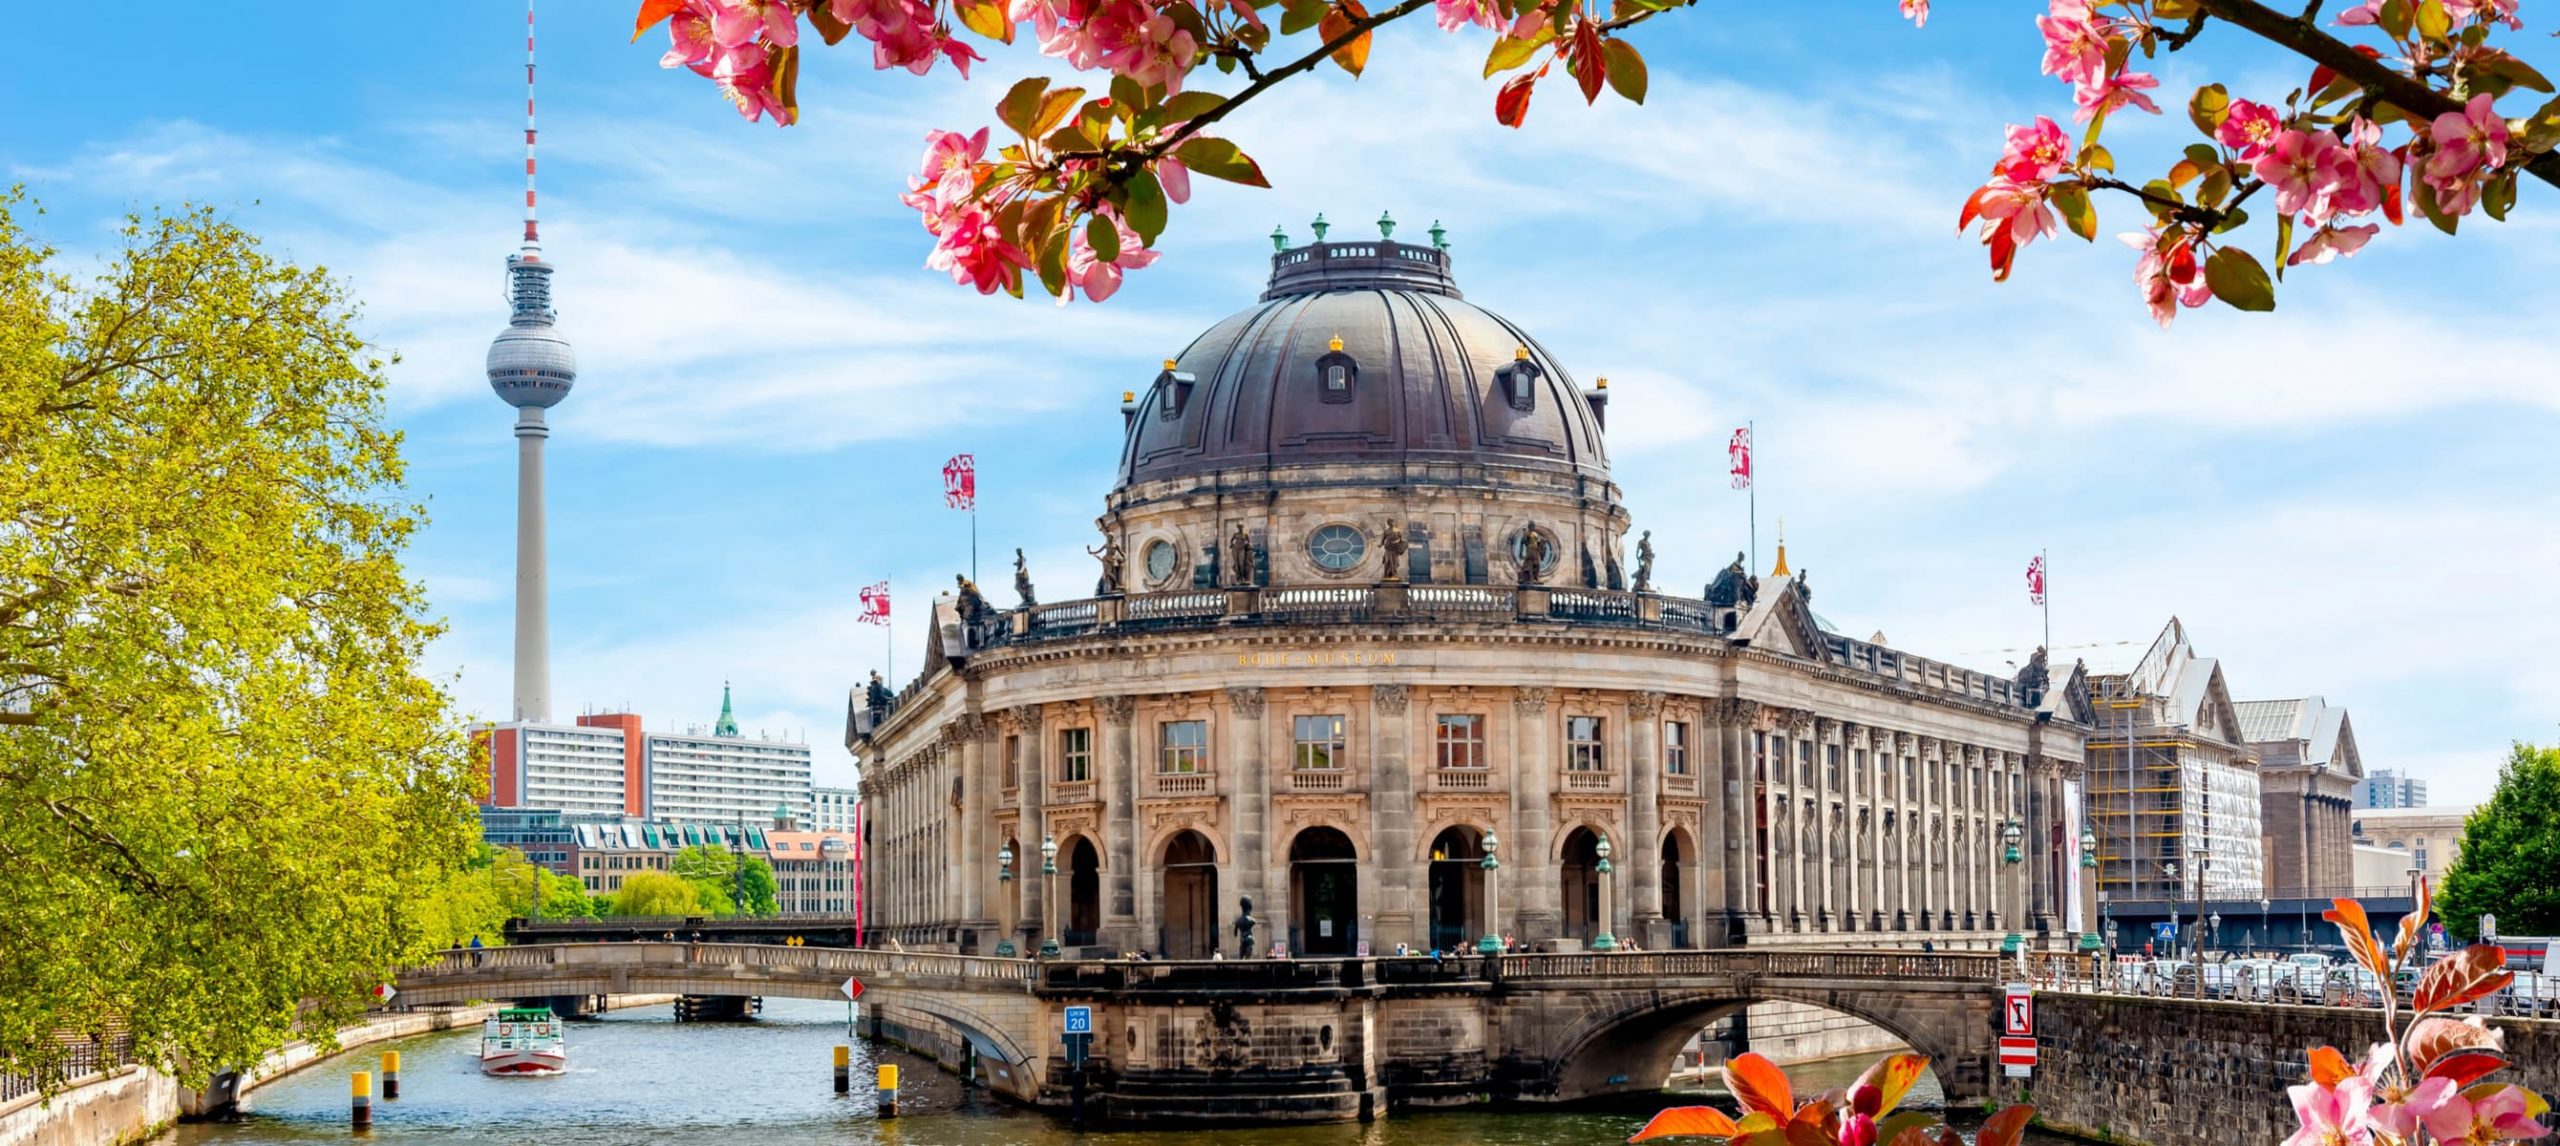 13 Amazing Museums and Galleries in Berlin, Germany